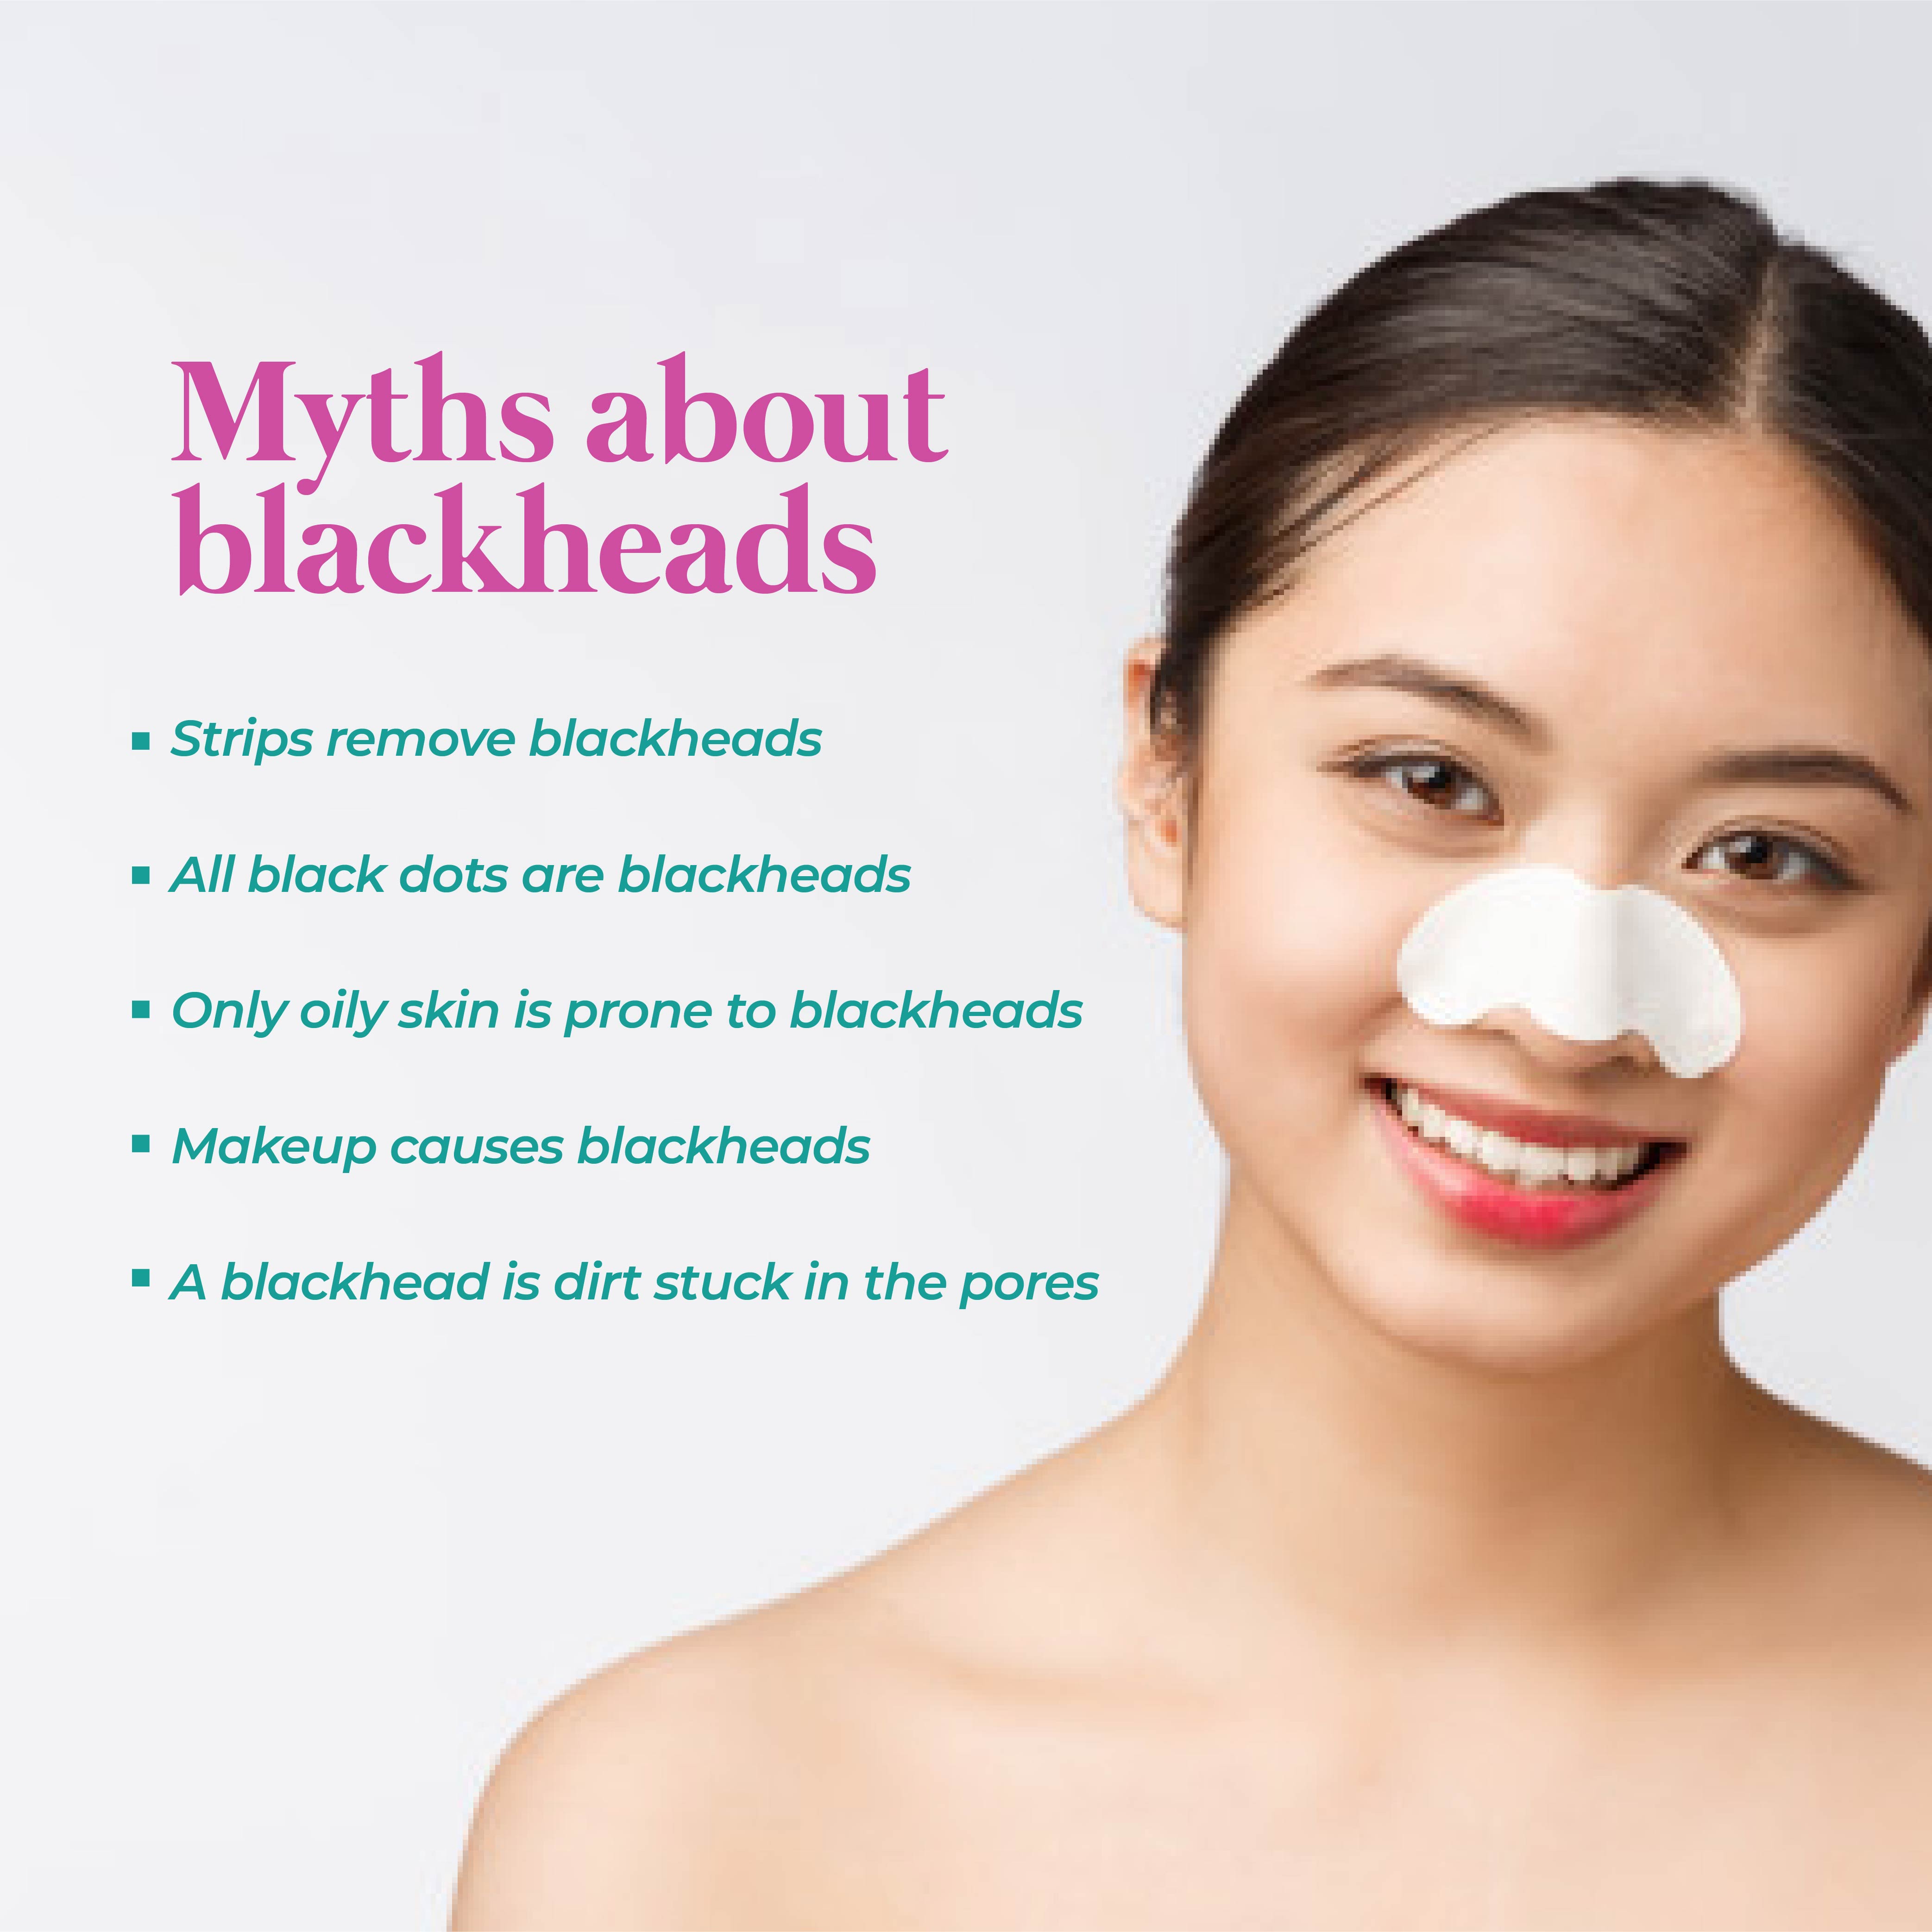 This is an image of the myths about blackheads